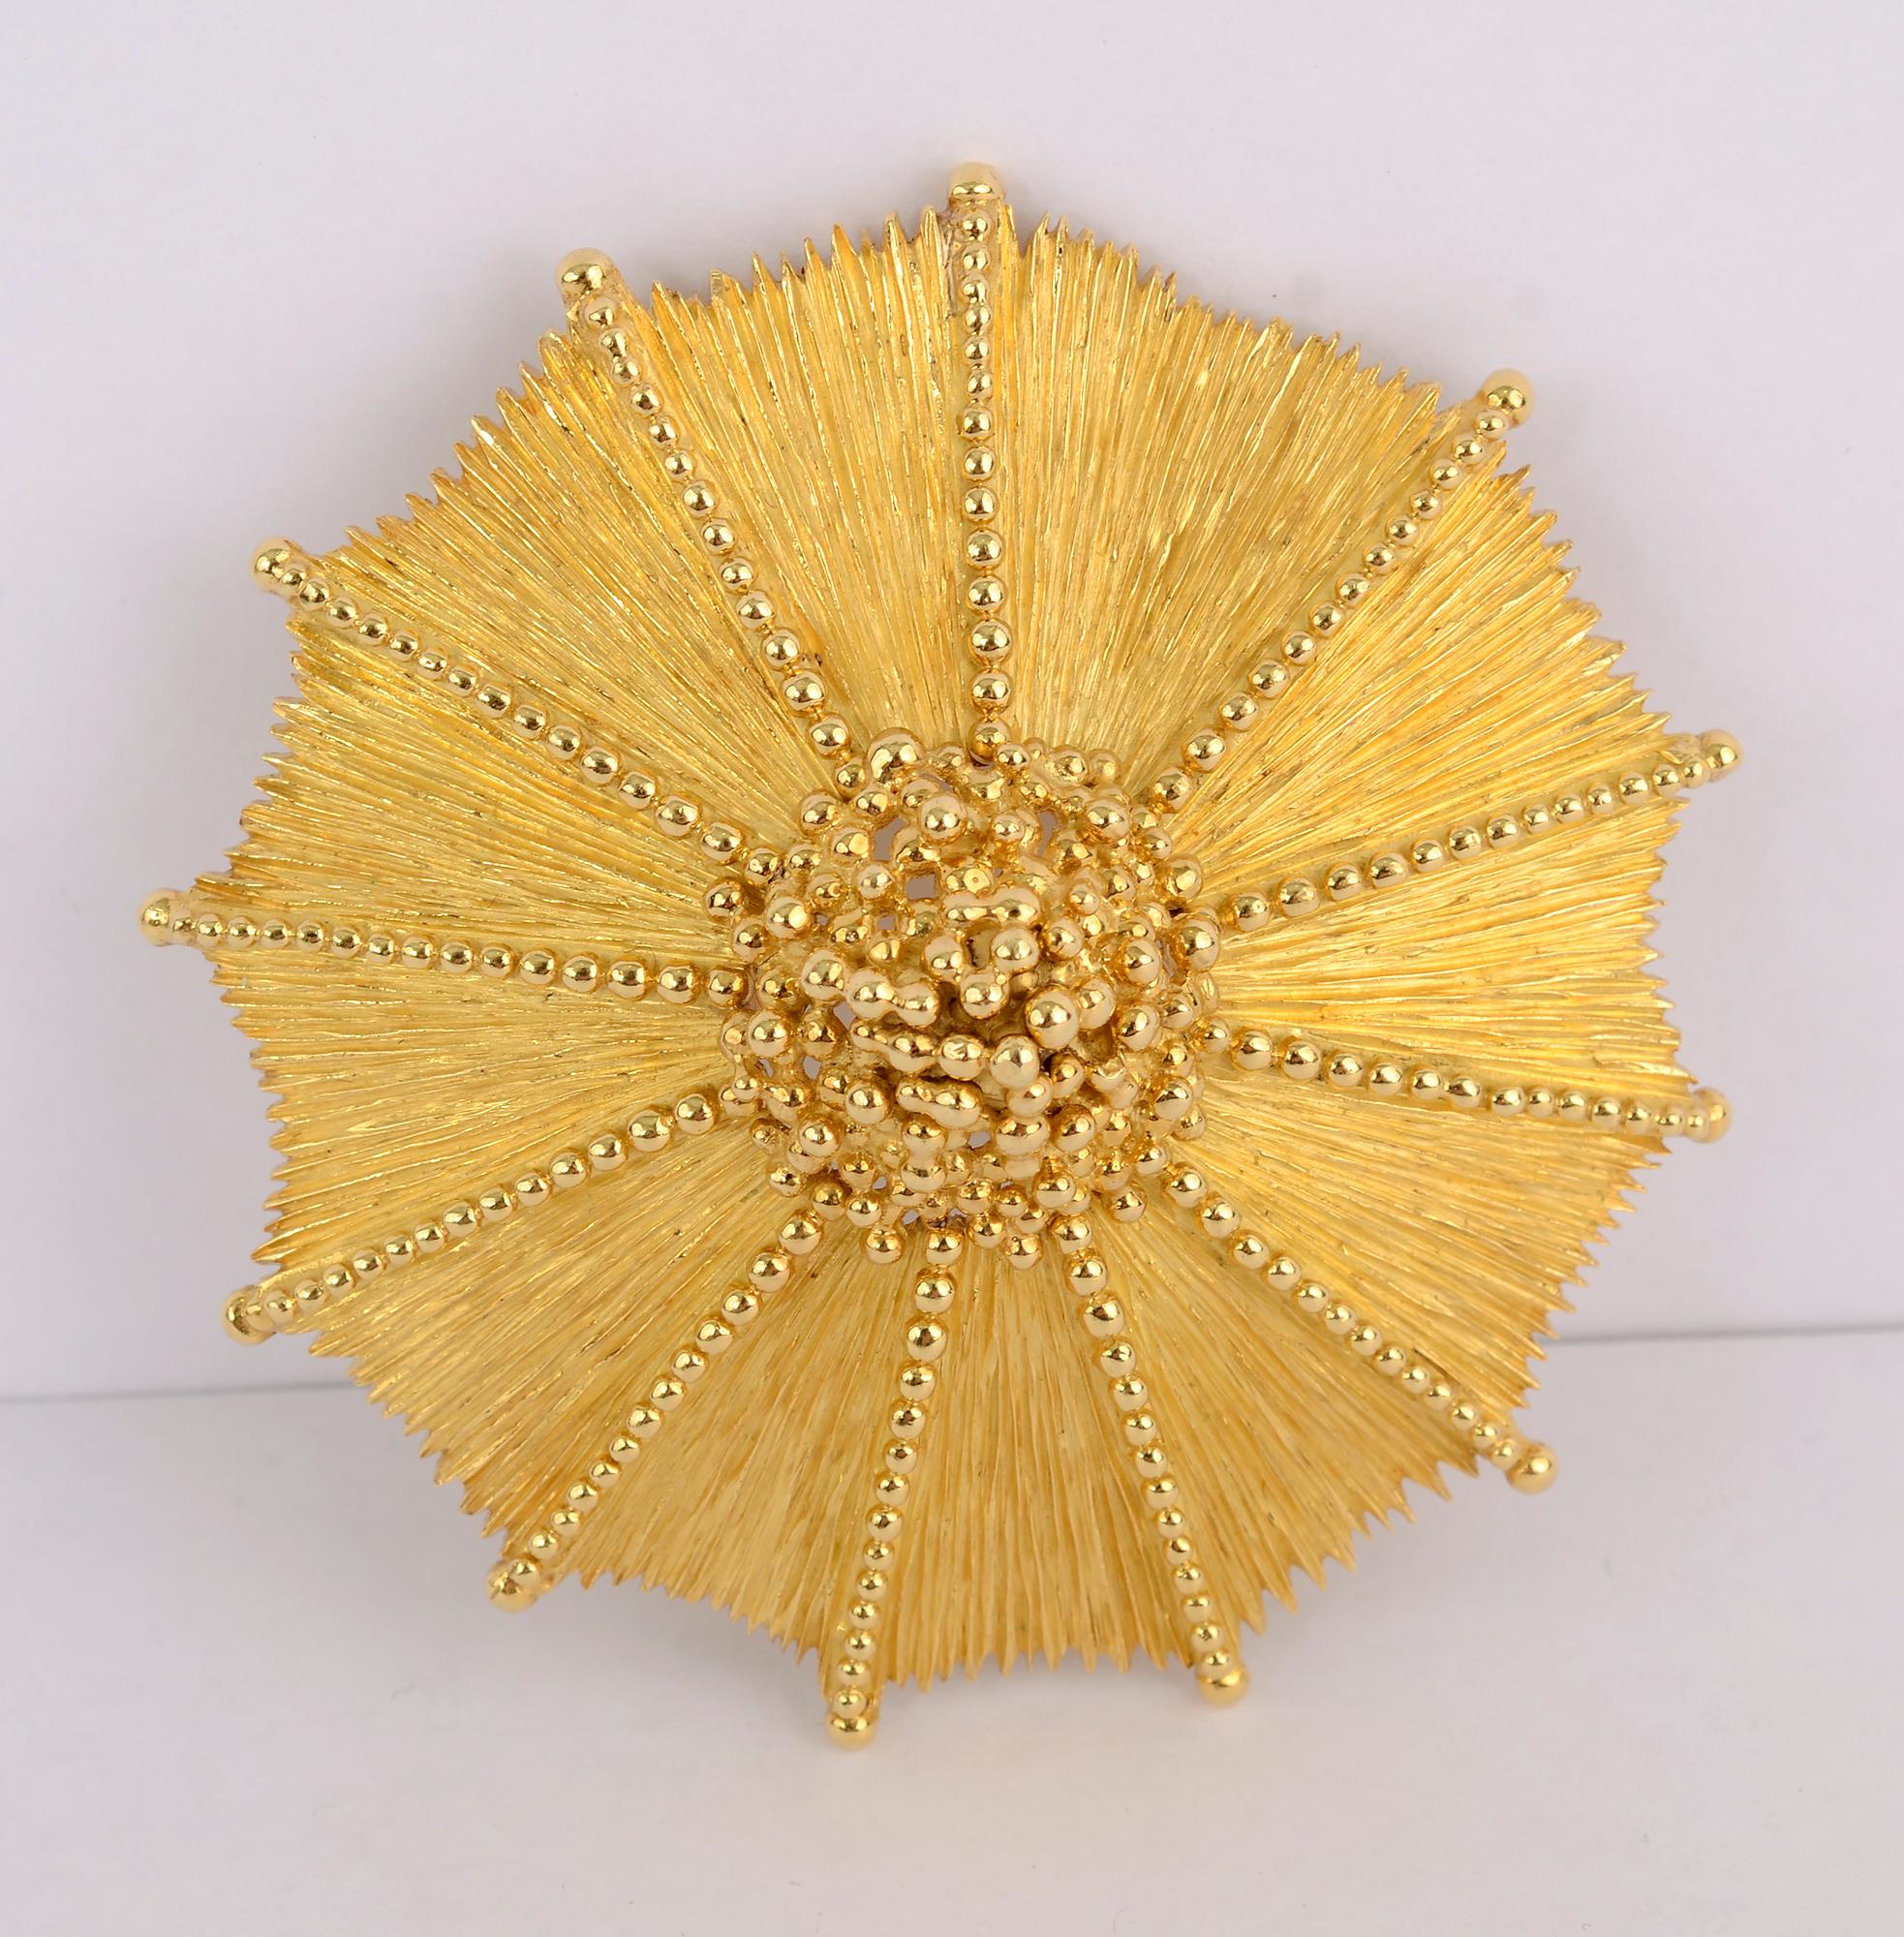 Wonderfully textured and dimensional pendant/ brooch by American designer, Henry Dunay. Dunay has been awarded over 50 National and International Awards over fifty years and  is the four time winner of the Diamond International award.
Among other